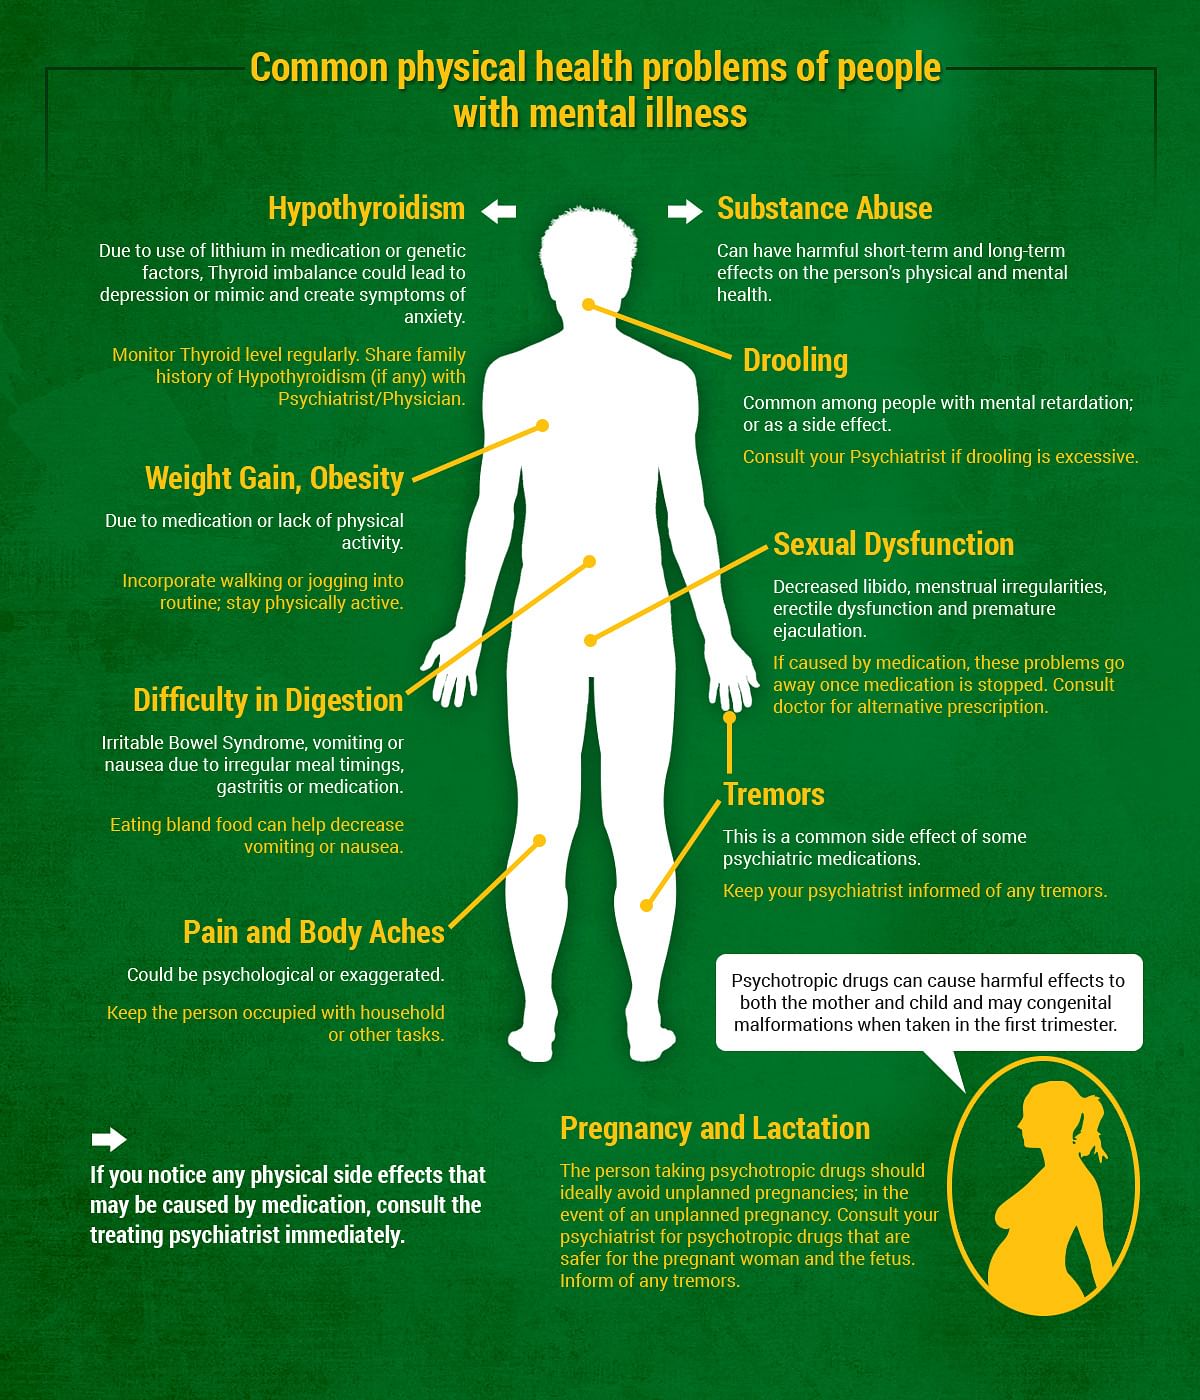 Common physical health issues